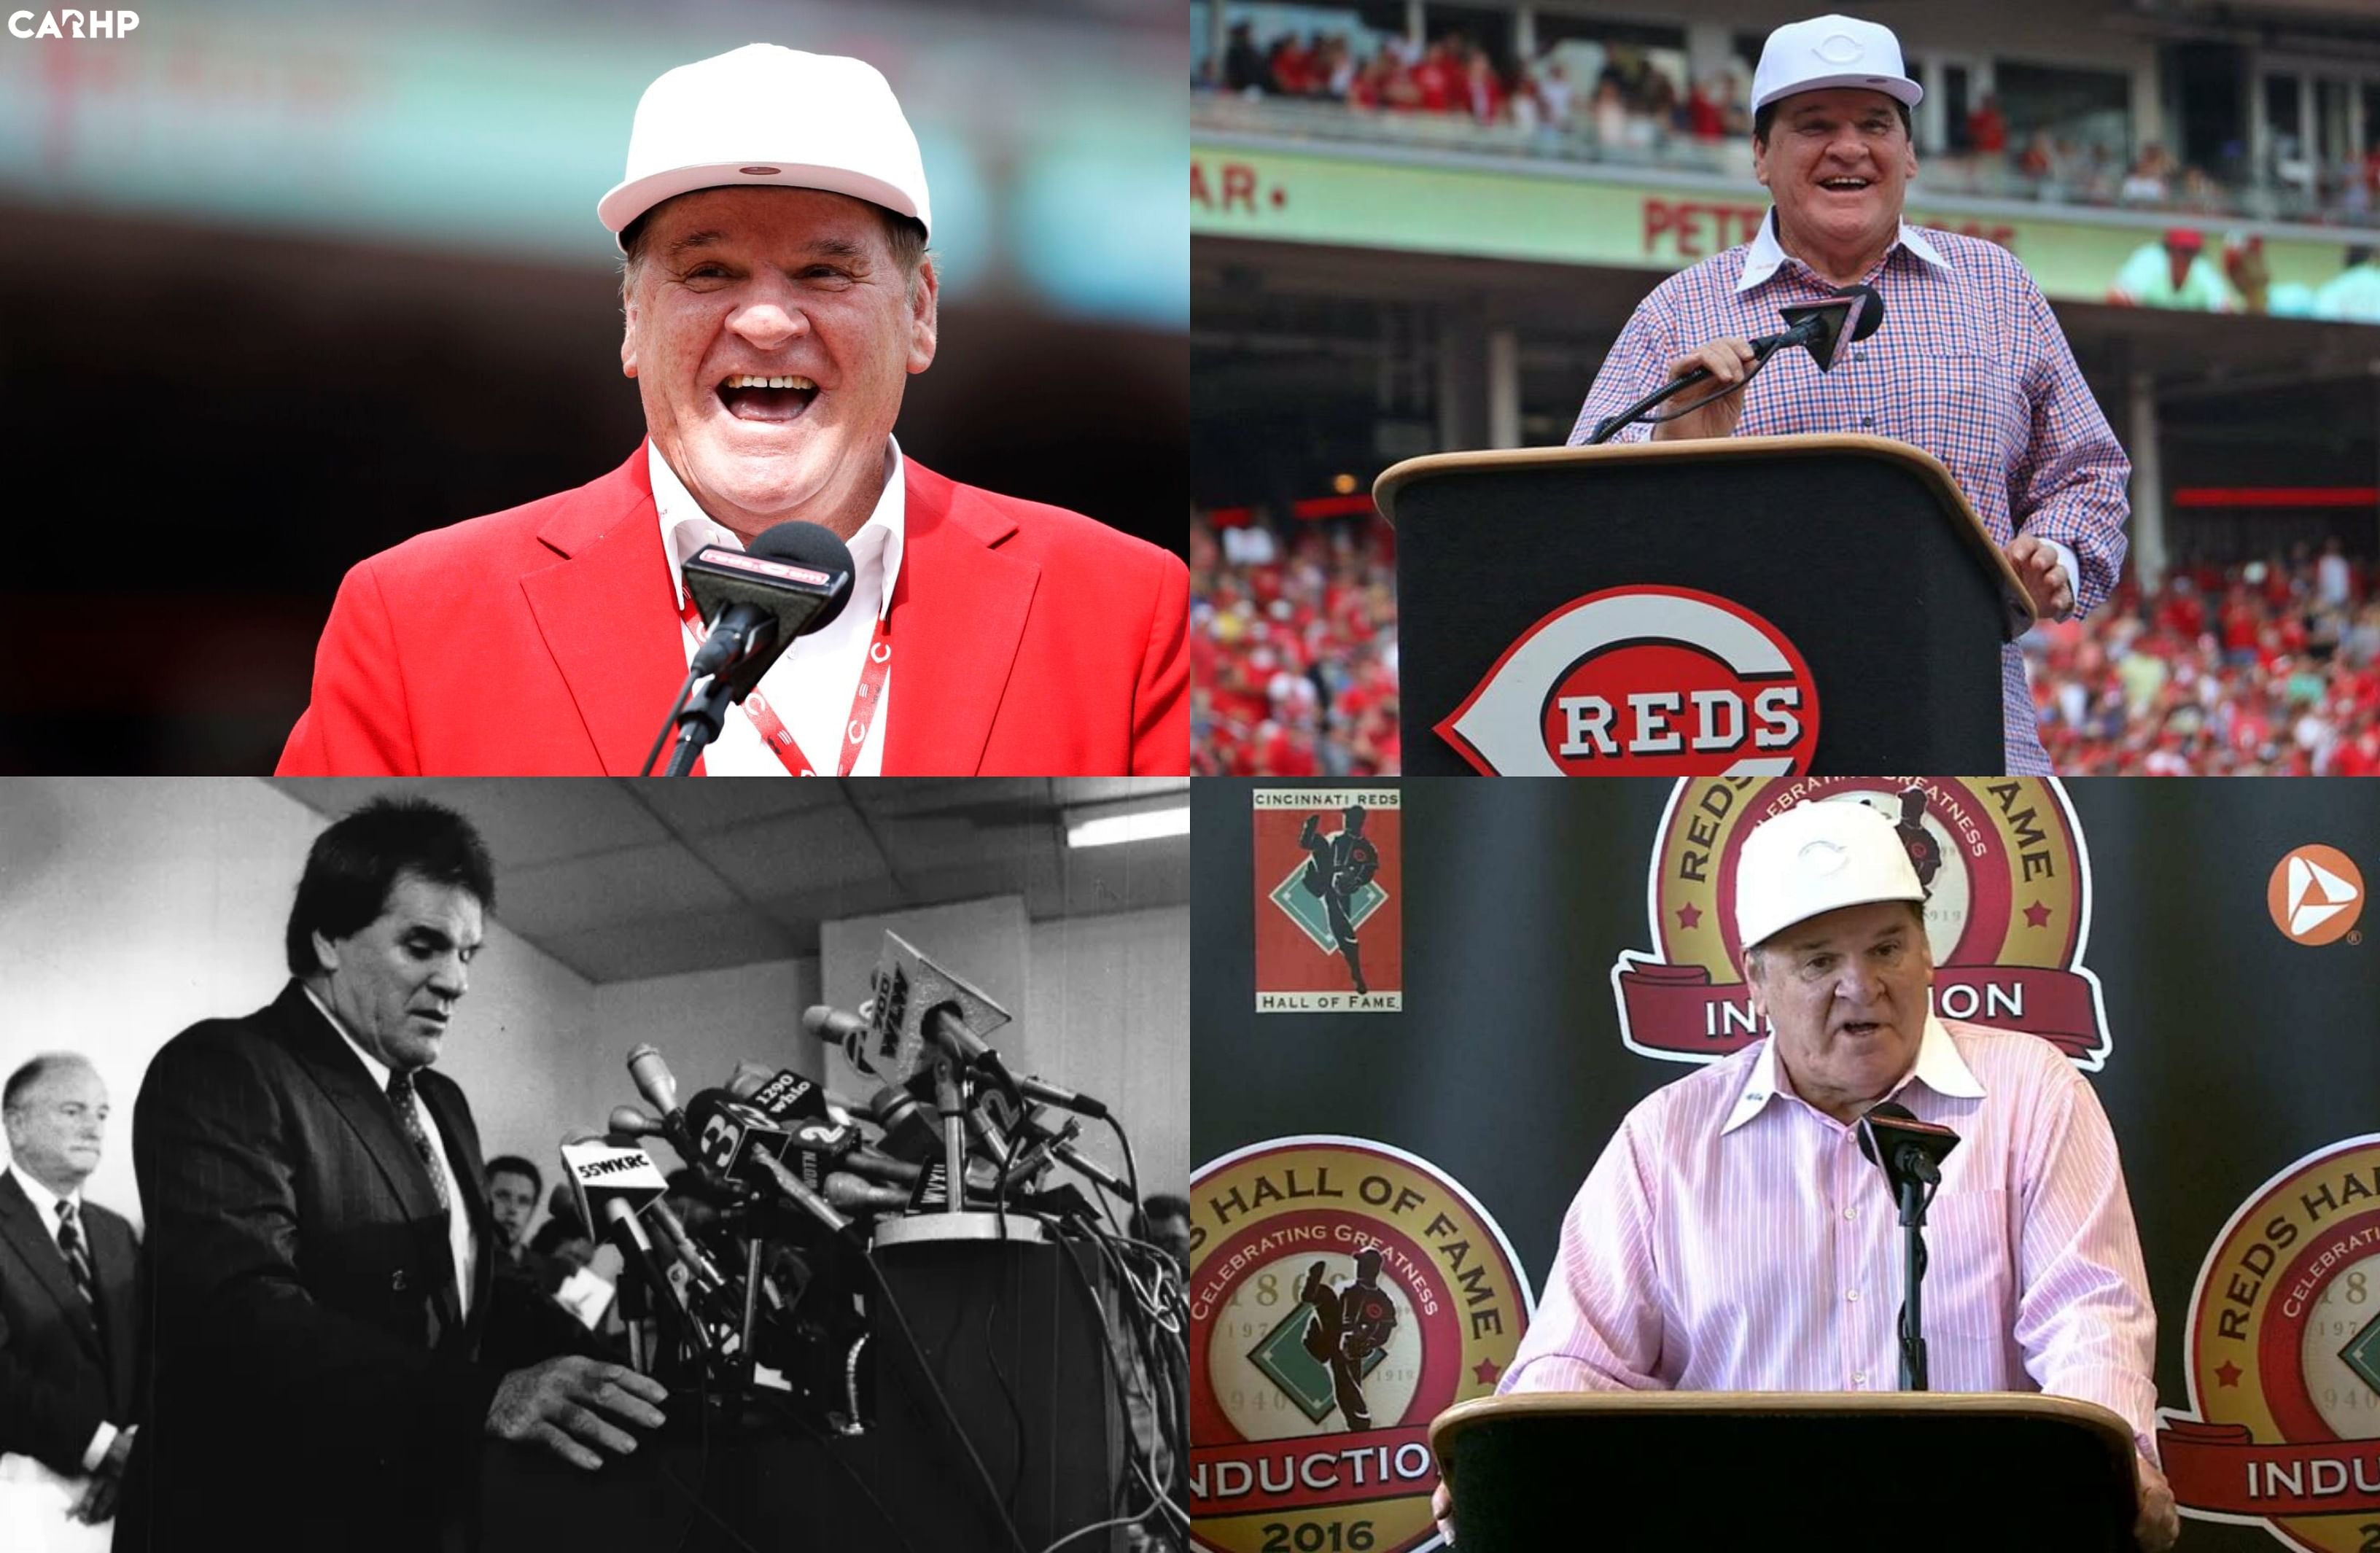 Pete Rose and His Partner Kiana Kim's Relationship: Facts to Know